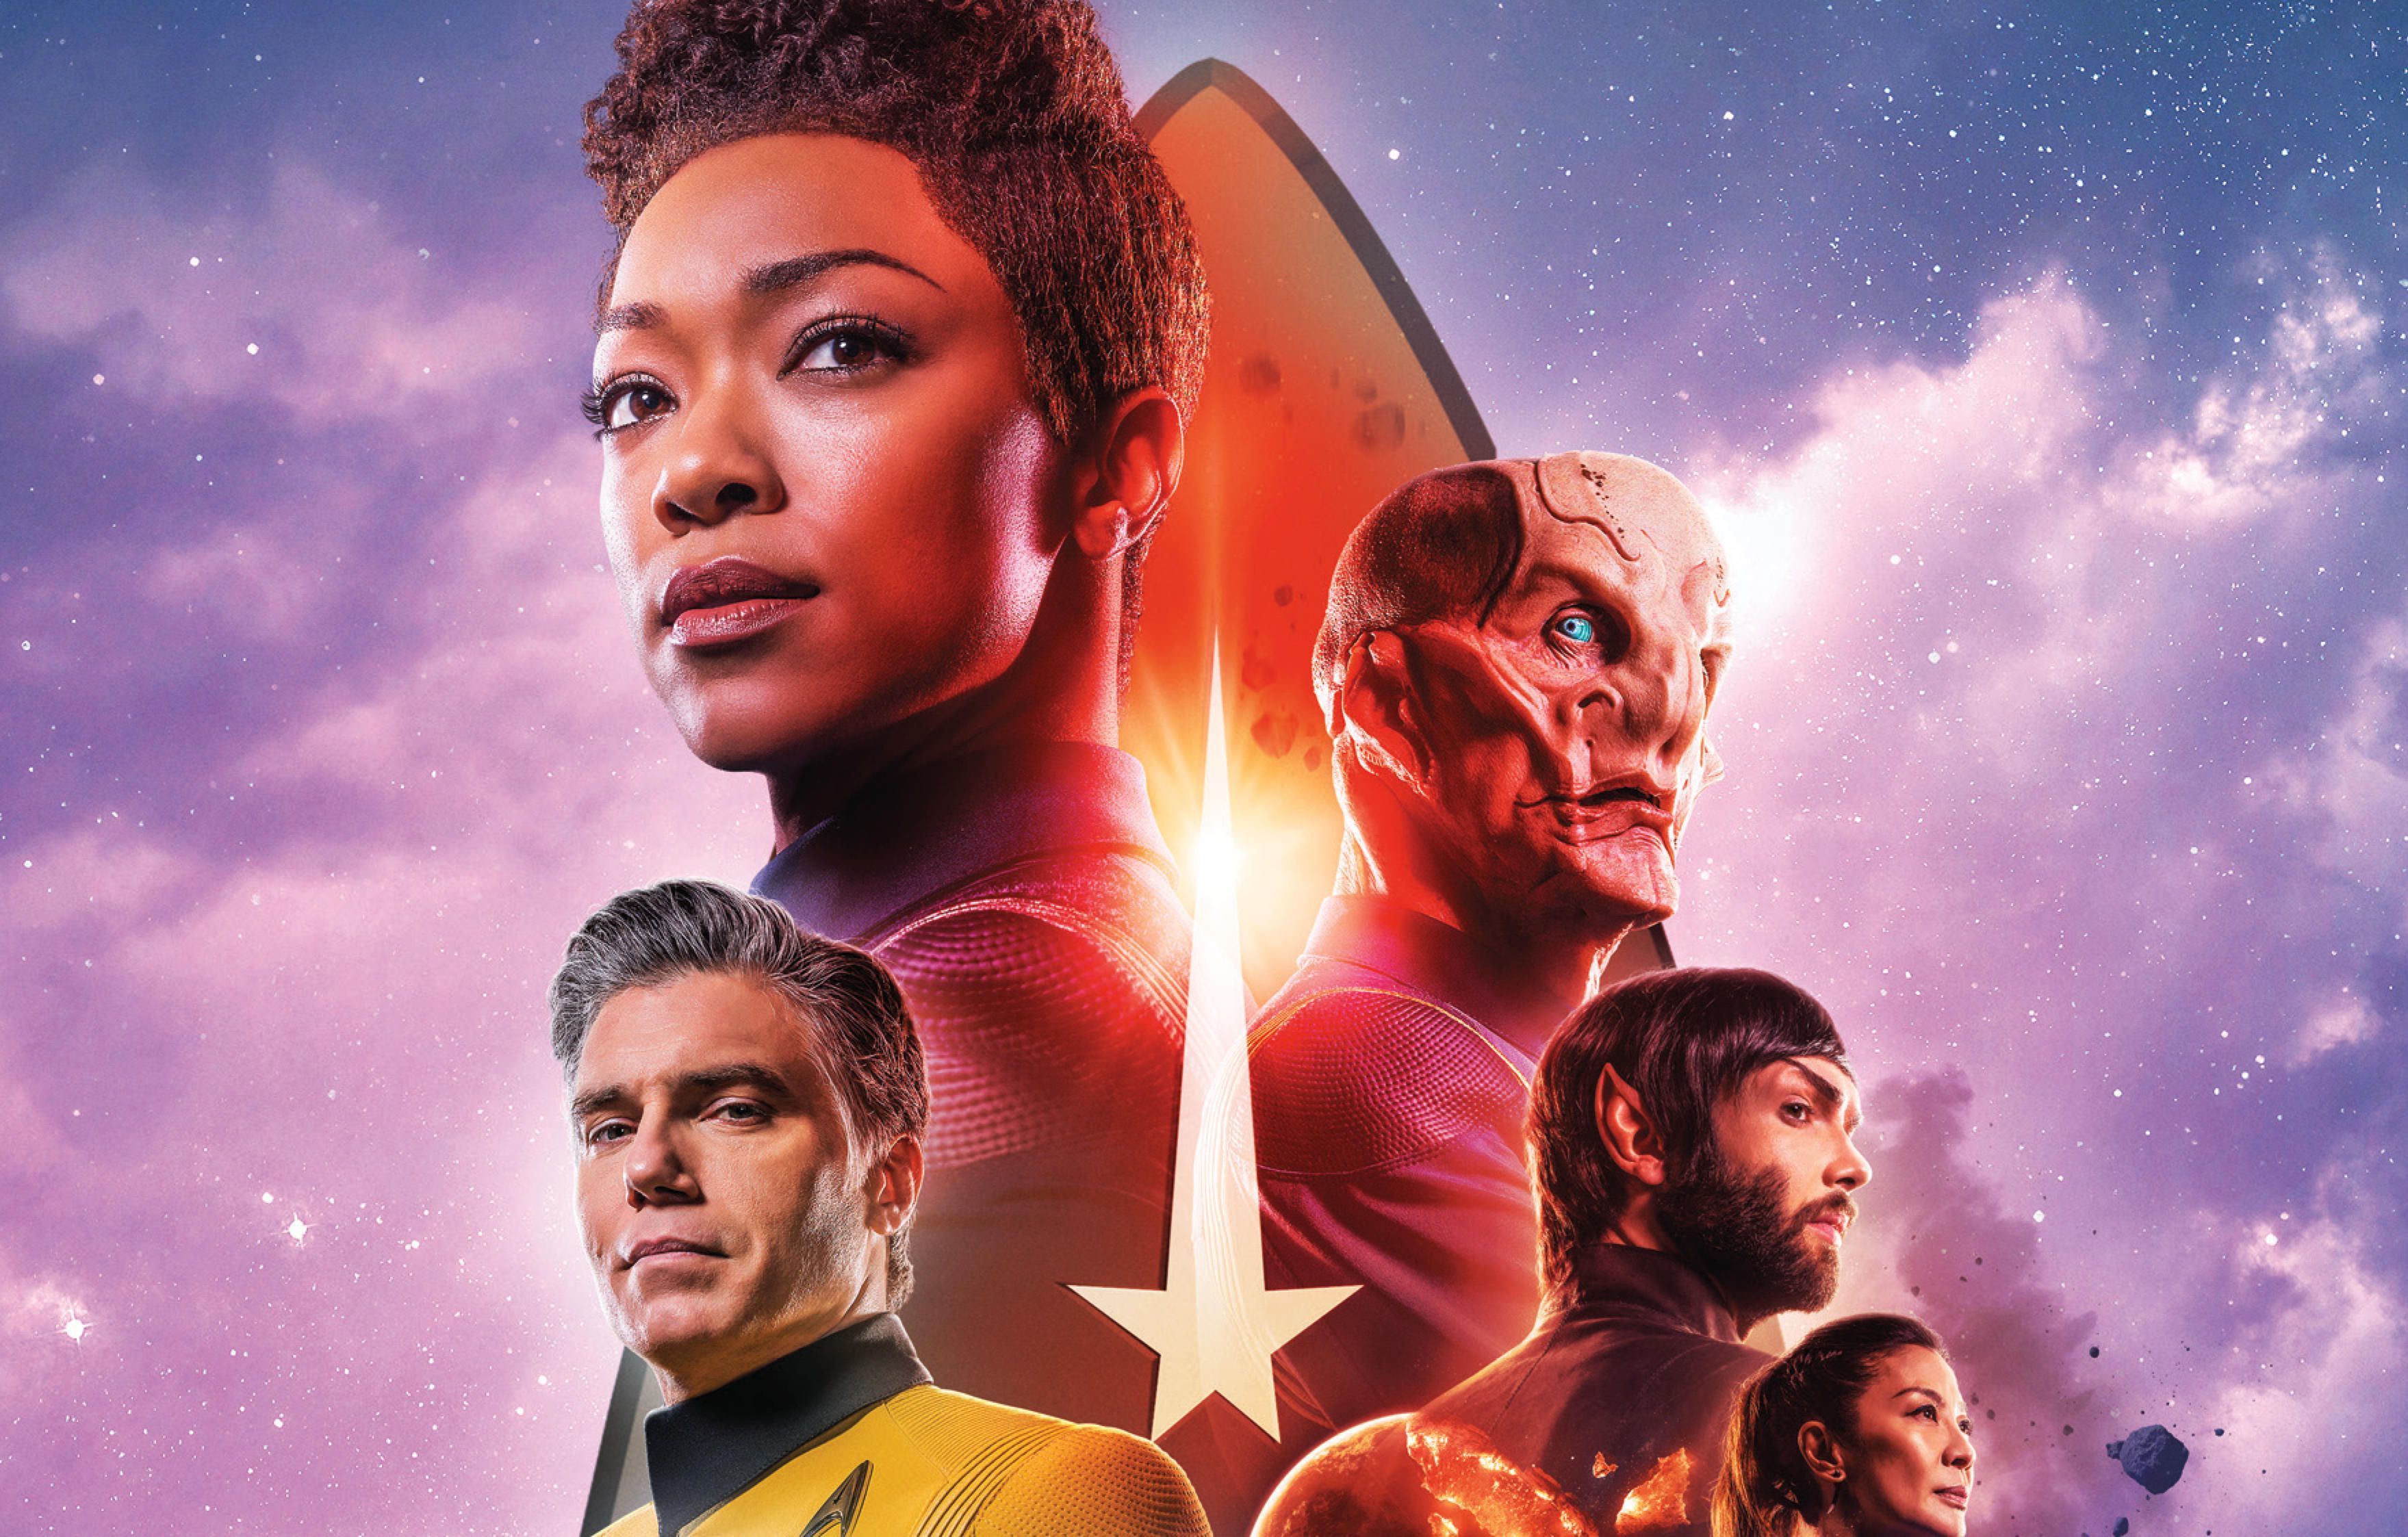 Star Trek Discovery Season 2 Poster 1440P Resolution Wallpaper, HD TV Series 4K Wallpaper, Image, Photo and Background